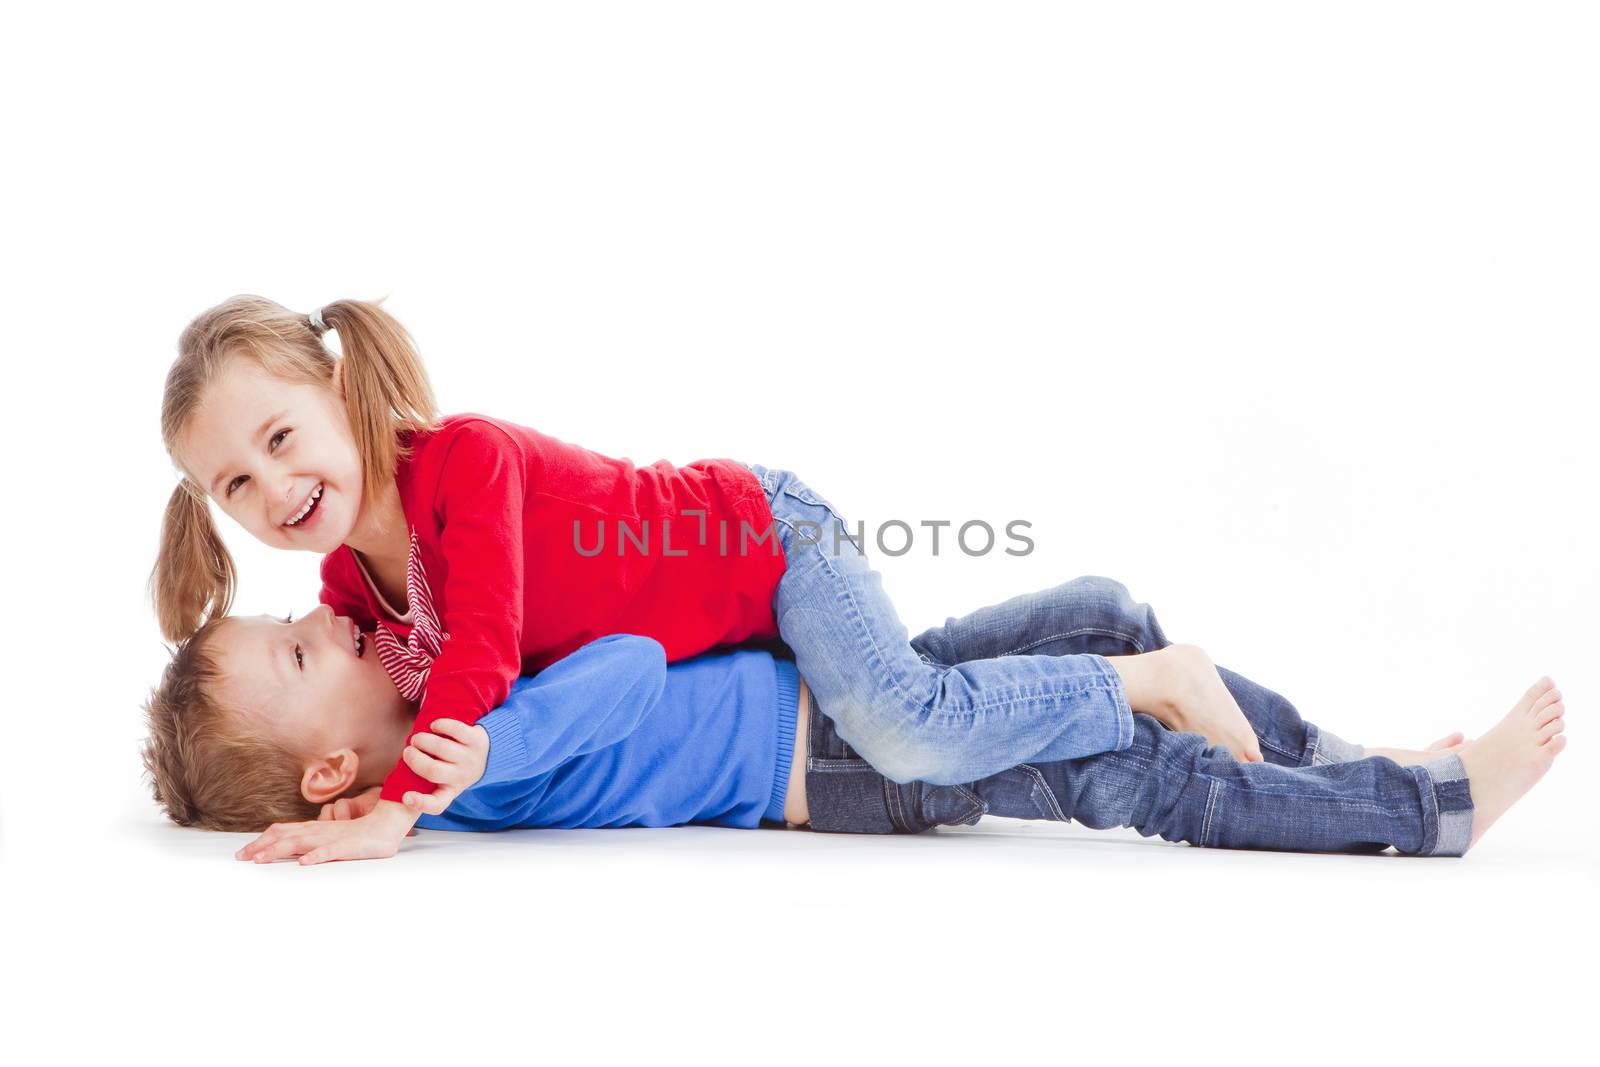 brother and sister having fun with each other - isolated on white